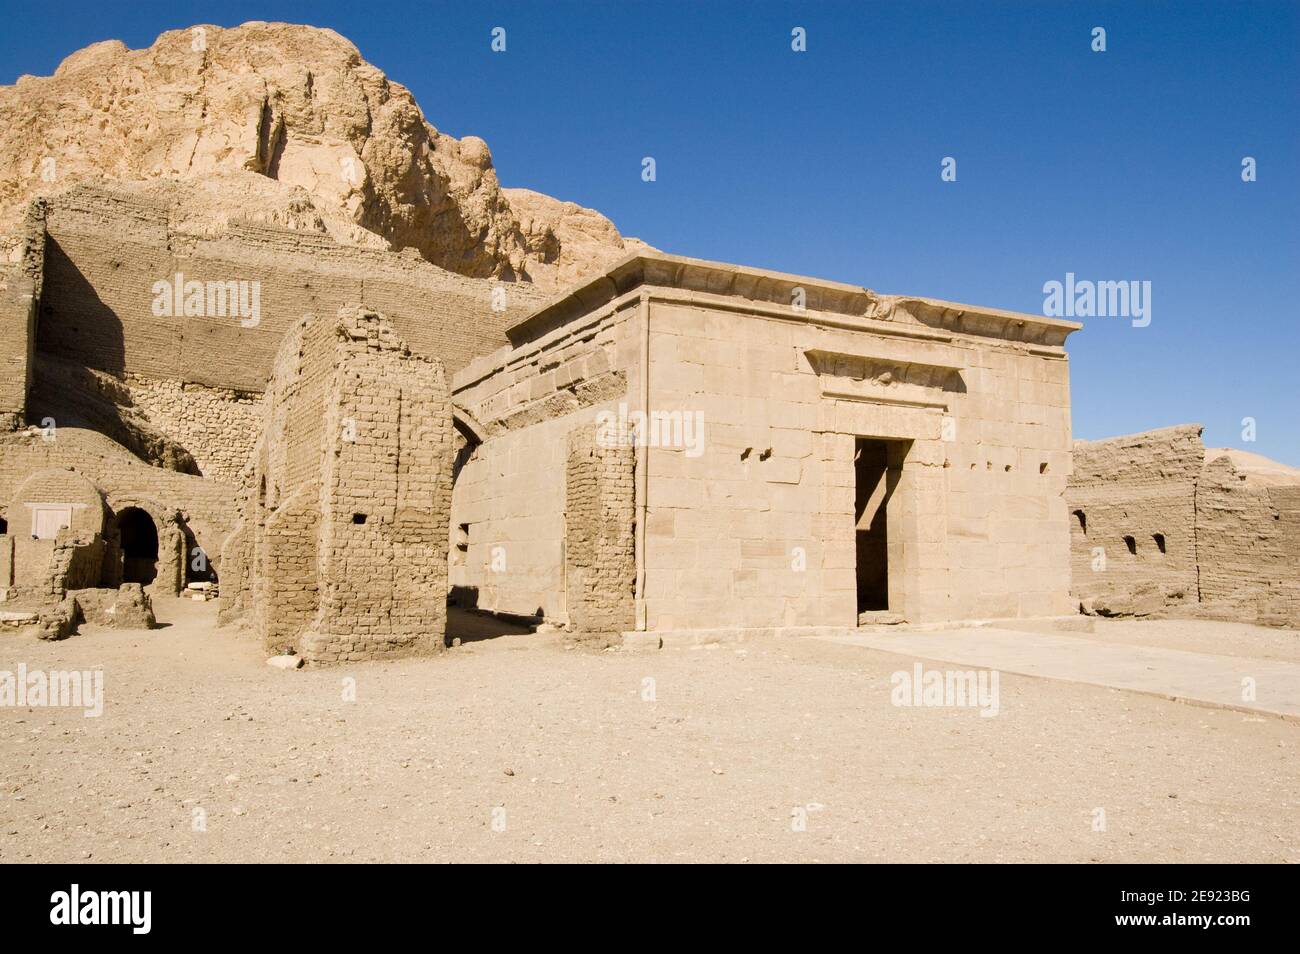 The Ancient Egyptian temple, constructed in the time of Ptolemy IV in the 3rd century BC at Deir el Medina, Luxor. Ancient ruin, over 1000 years old. Stock Photo